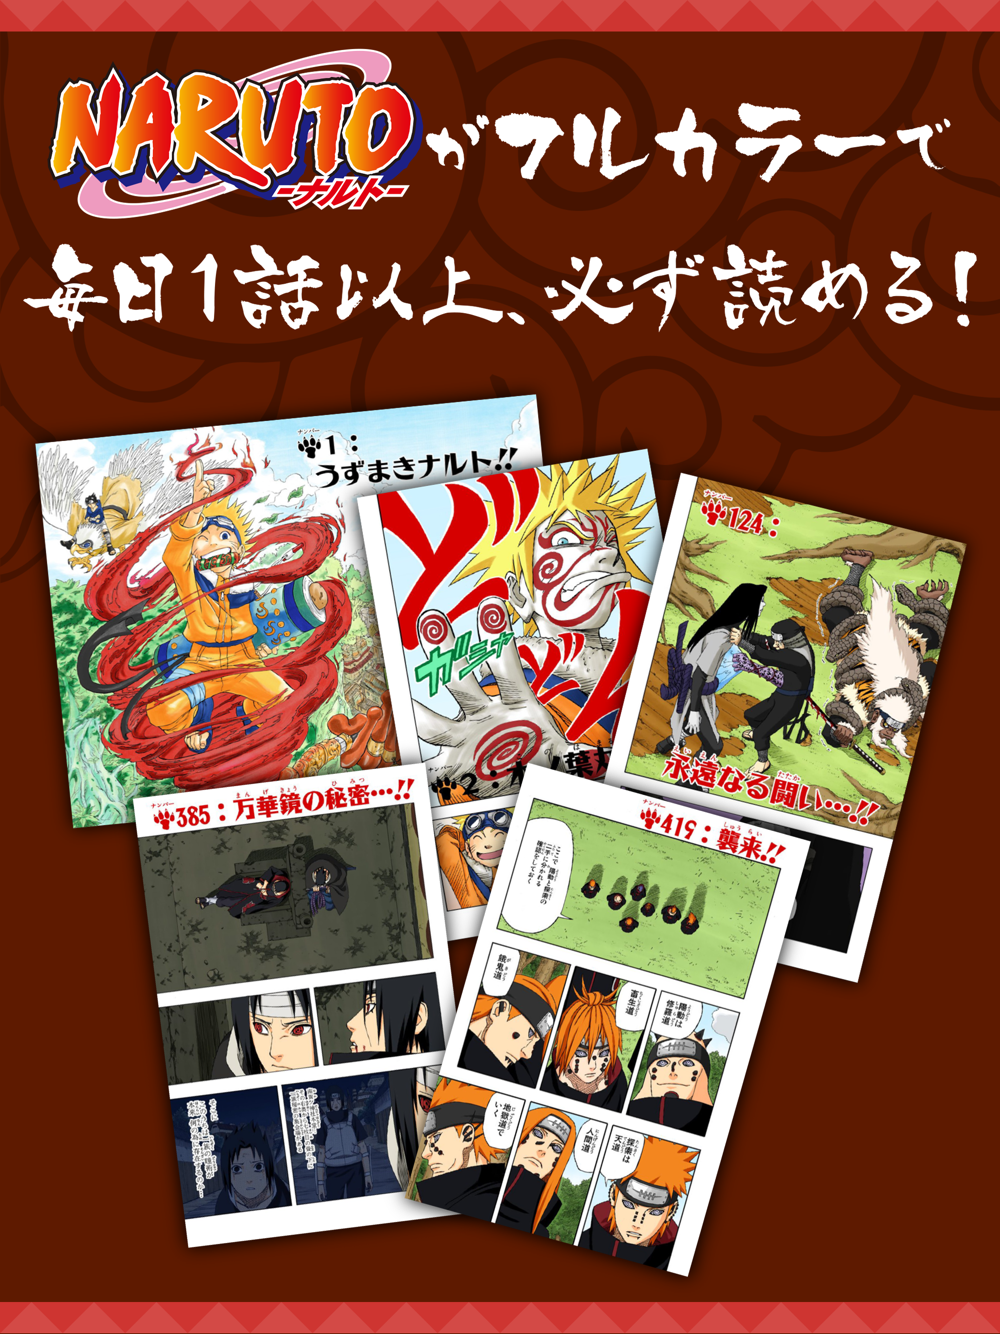 Naruto ナルト 公式漫画アプリ Free Download App For Iphone Steprimo Com